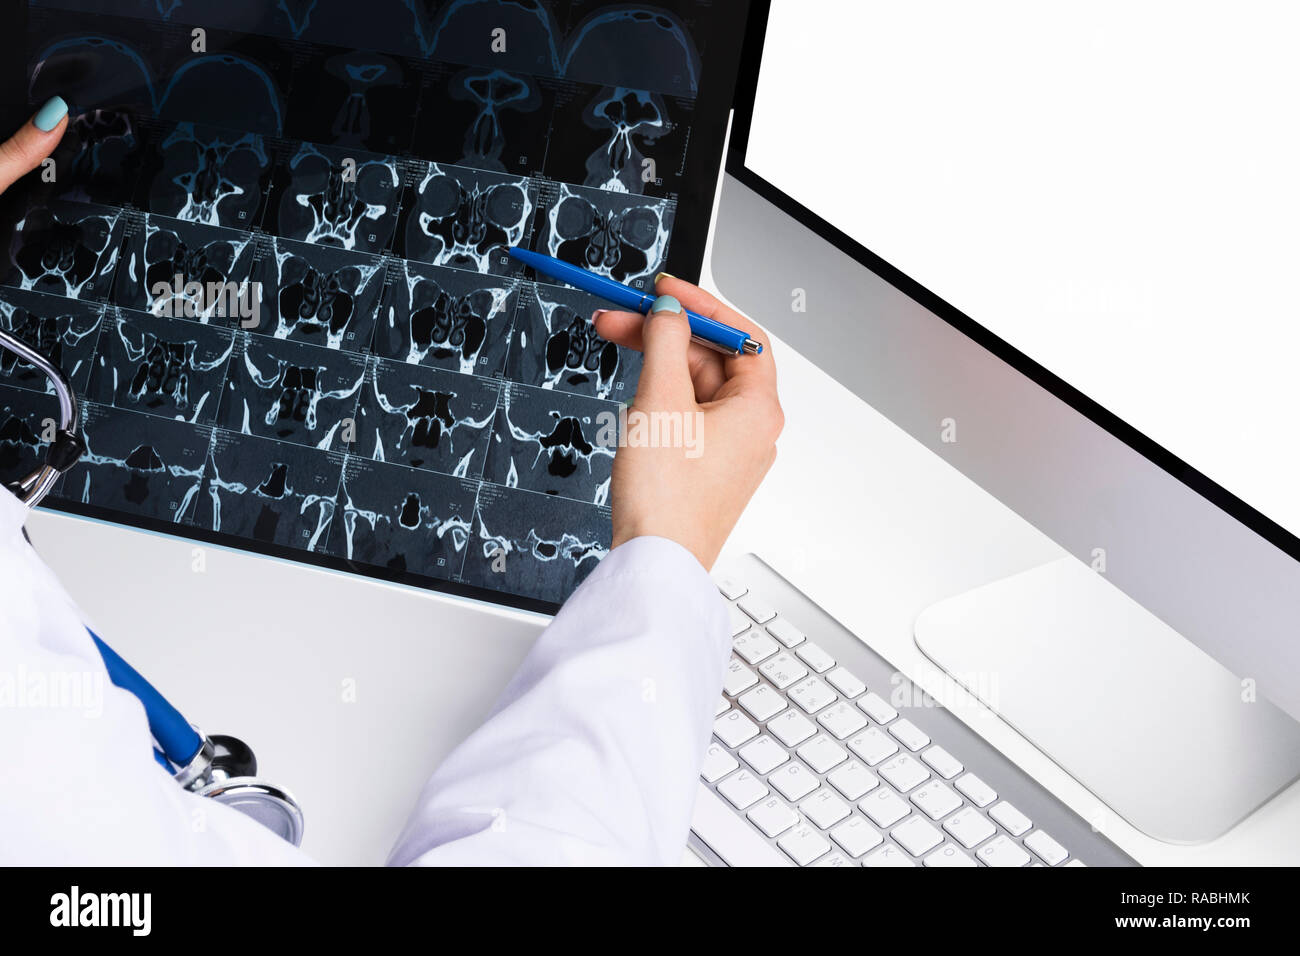 Doctor looking at computer tomography x-ray image, medicine doctor's working table with computer. Healthcare concept Stock Photo